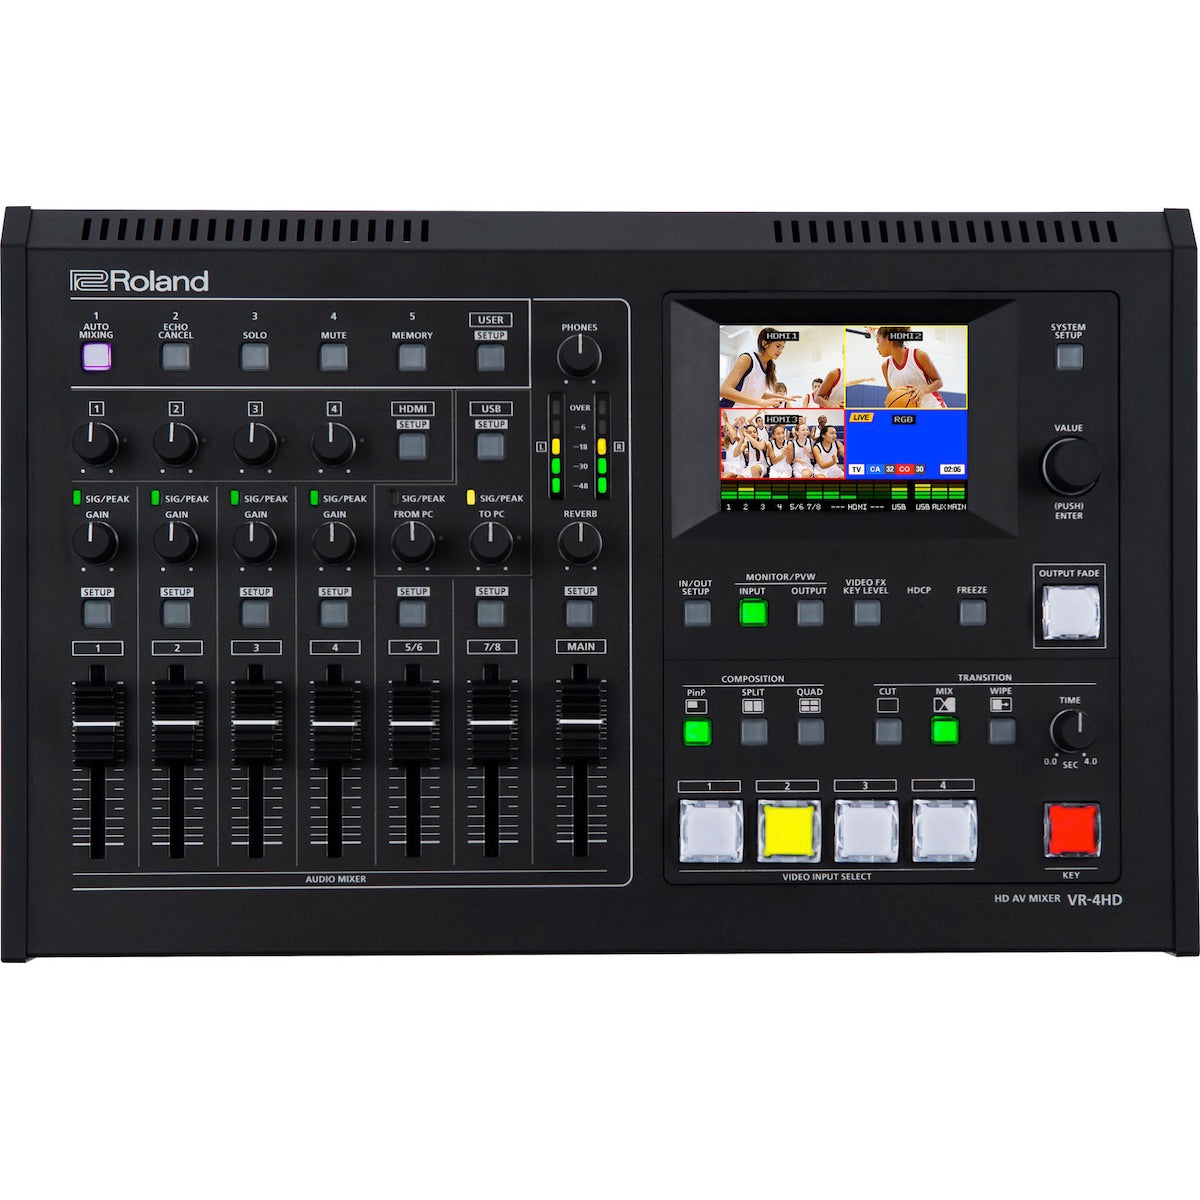 Roland VR-4HD - All-In-One HD AV Mixer with Streaming and Recording, top